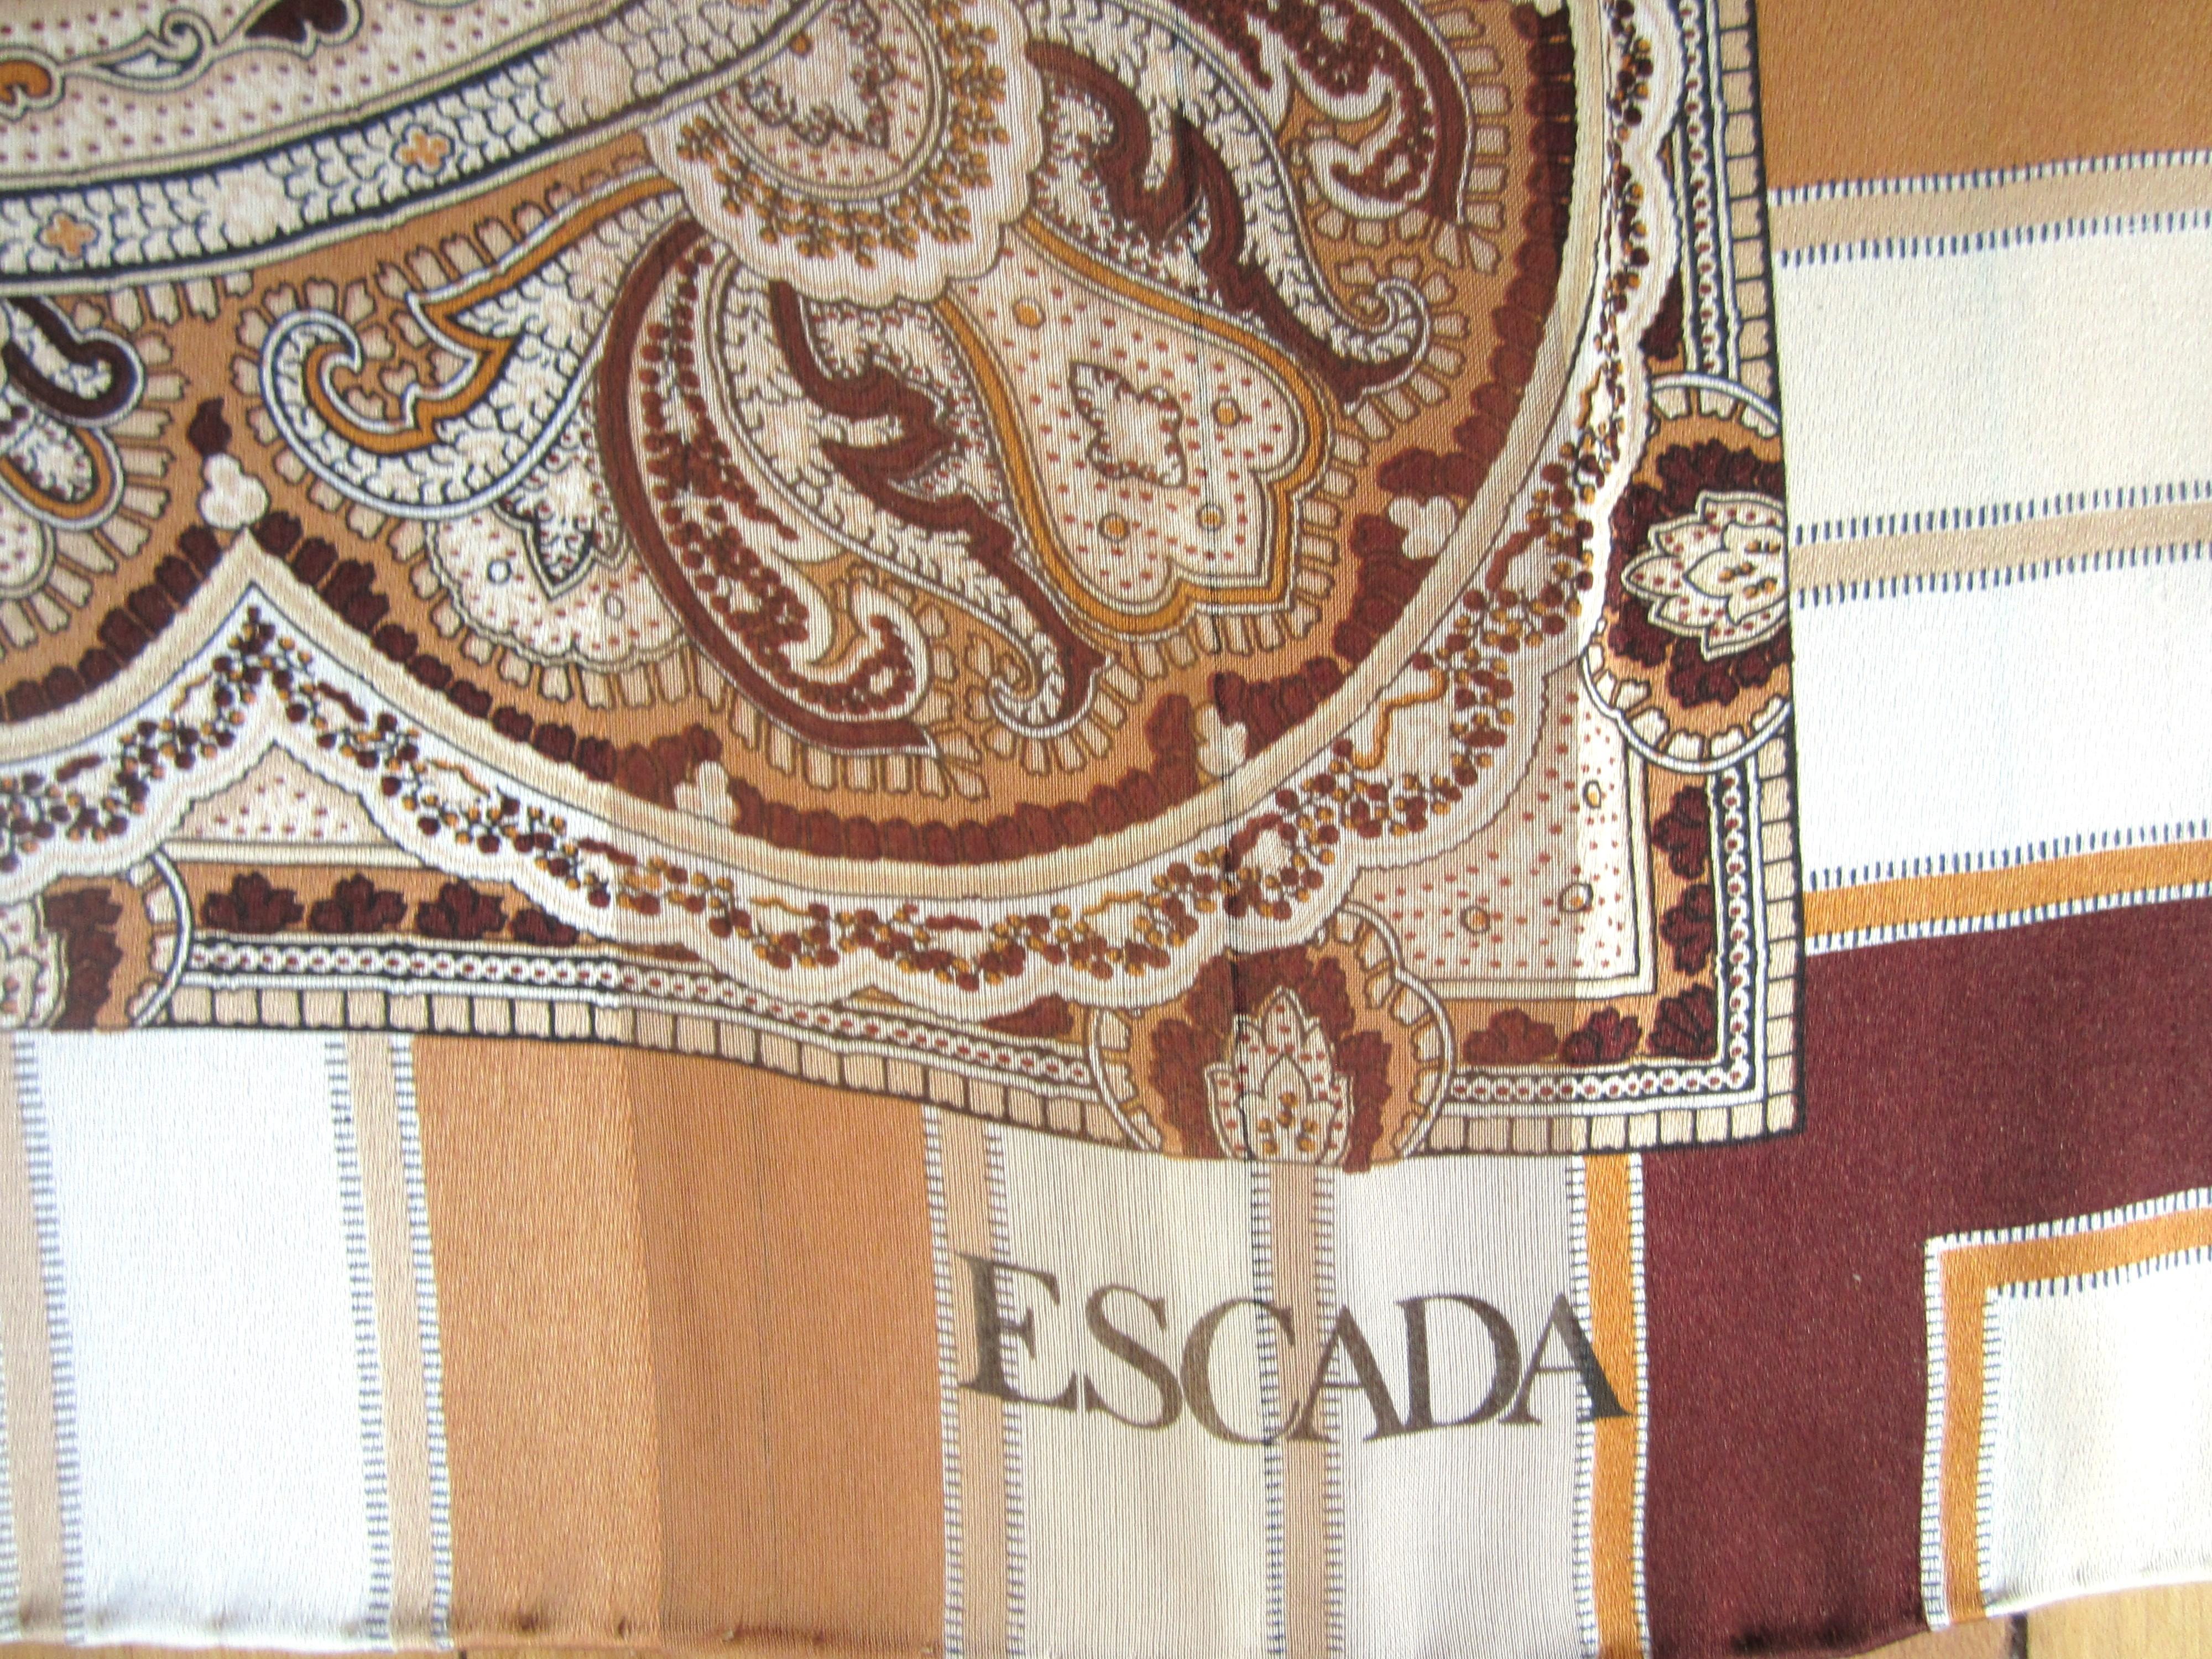 1990s Silk Escada Brown Paisley Scarf shawl, New, Never worn 90s  In New Condition For Sale In Wallkill, NY